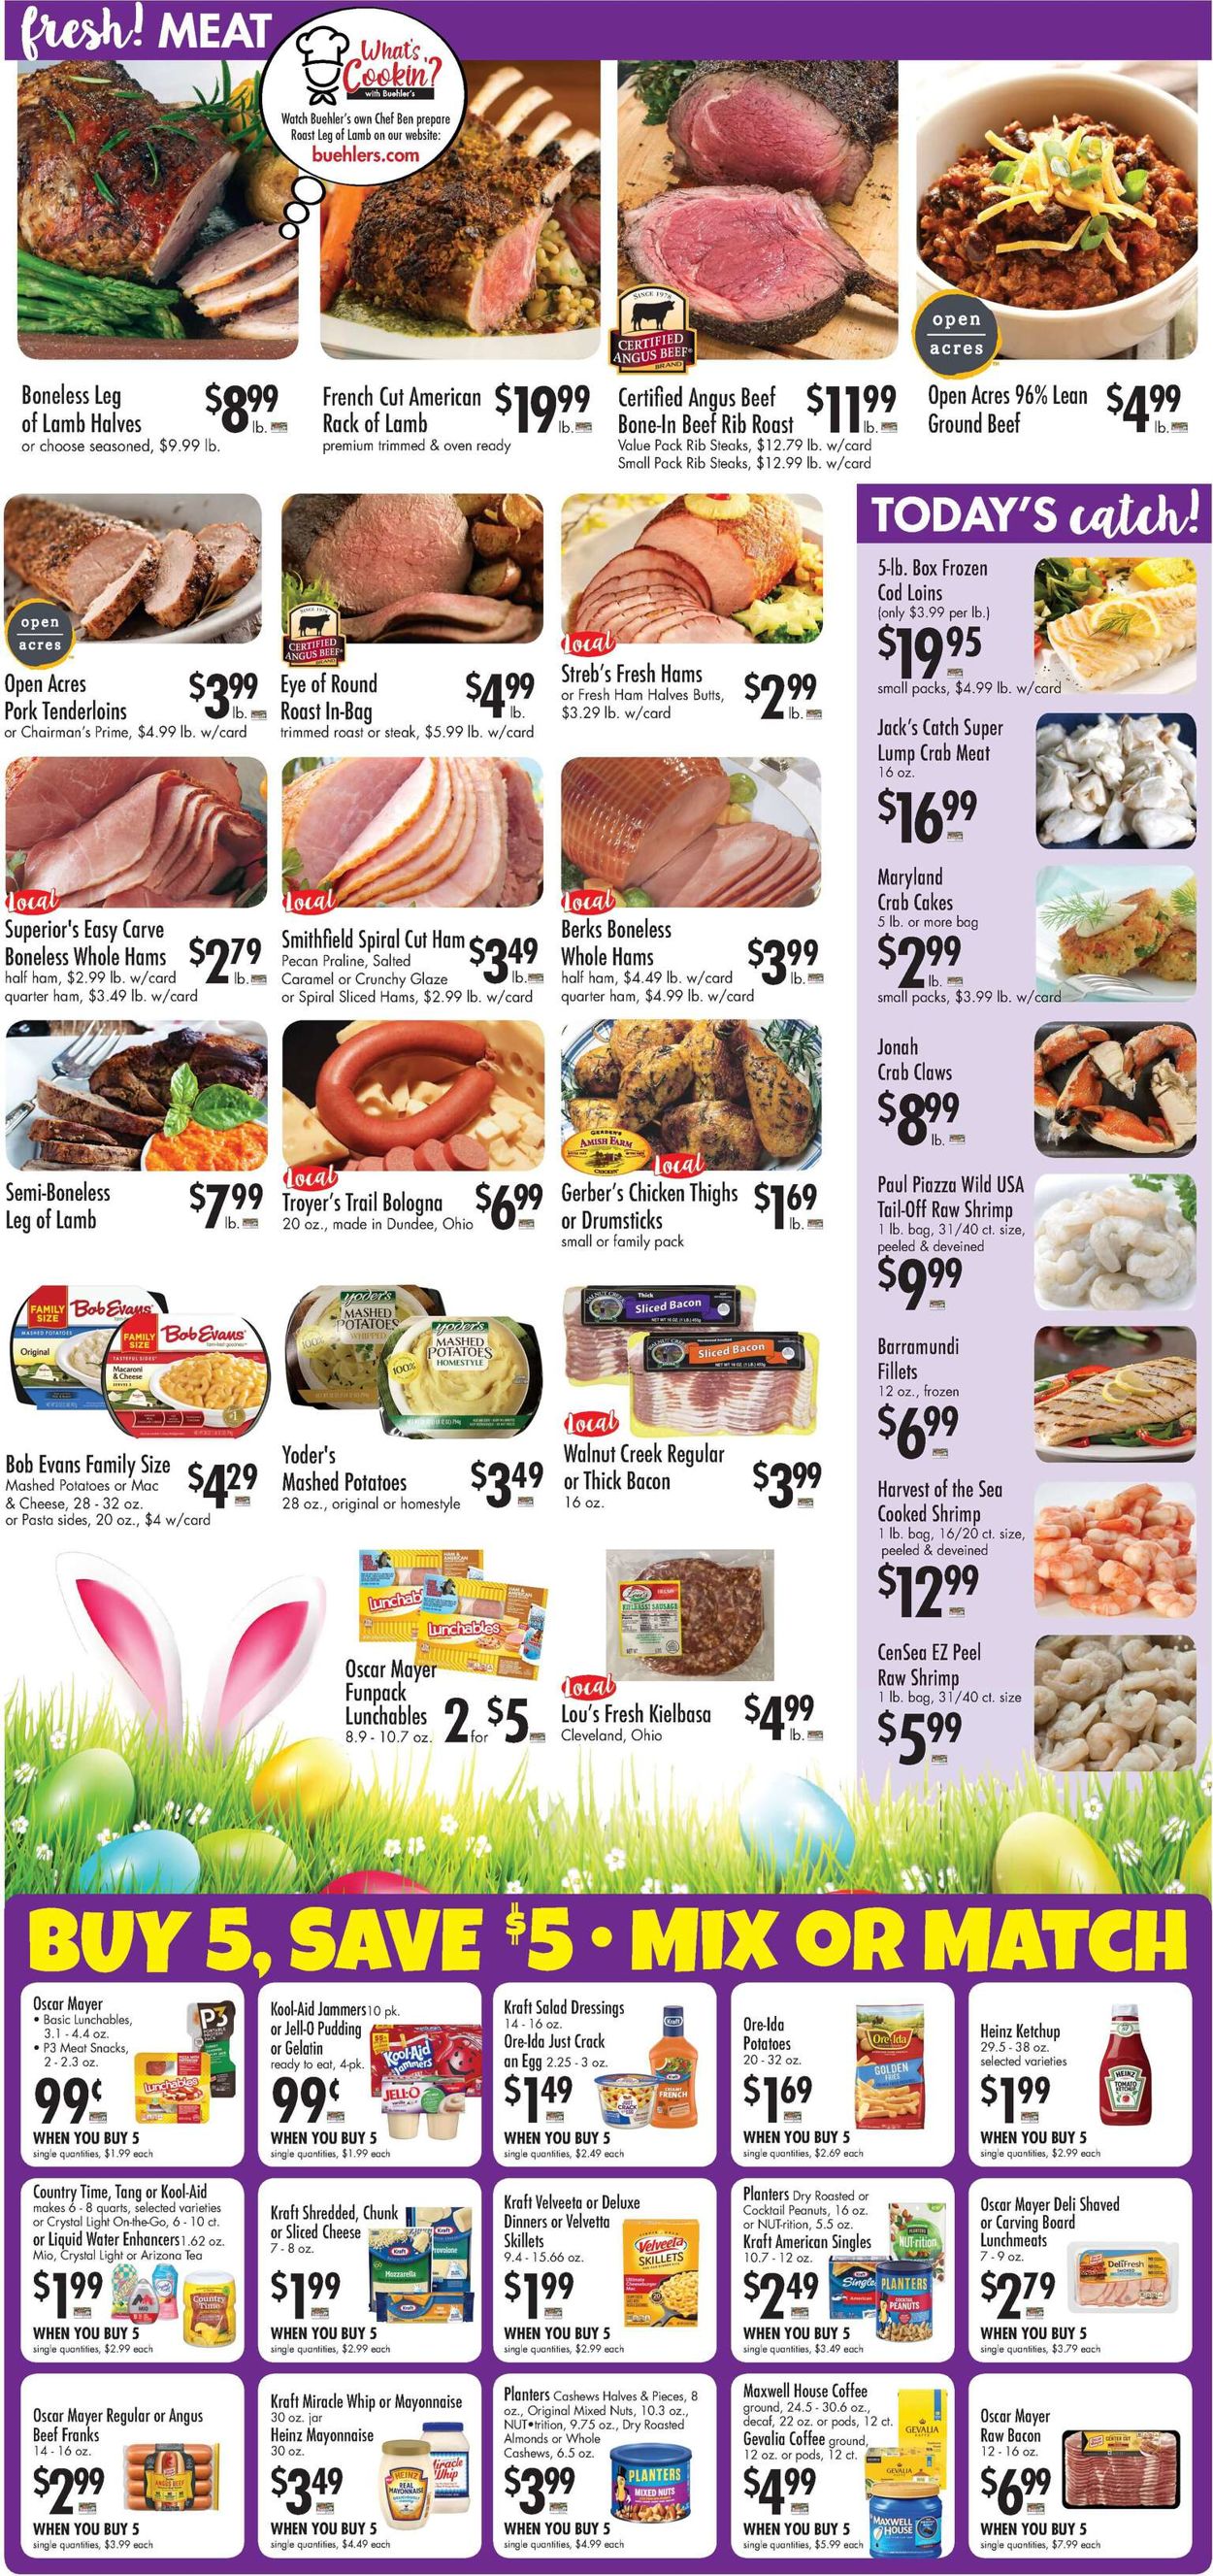 Buehler's Fresh Foods - Easter 2021 ad Weekly Ad Circular - valid 03/31-04/06/2021 (Page 2)